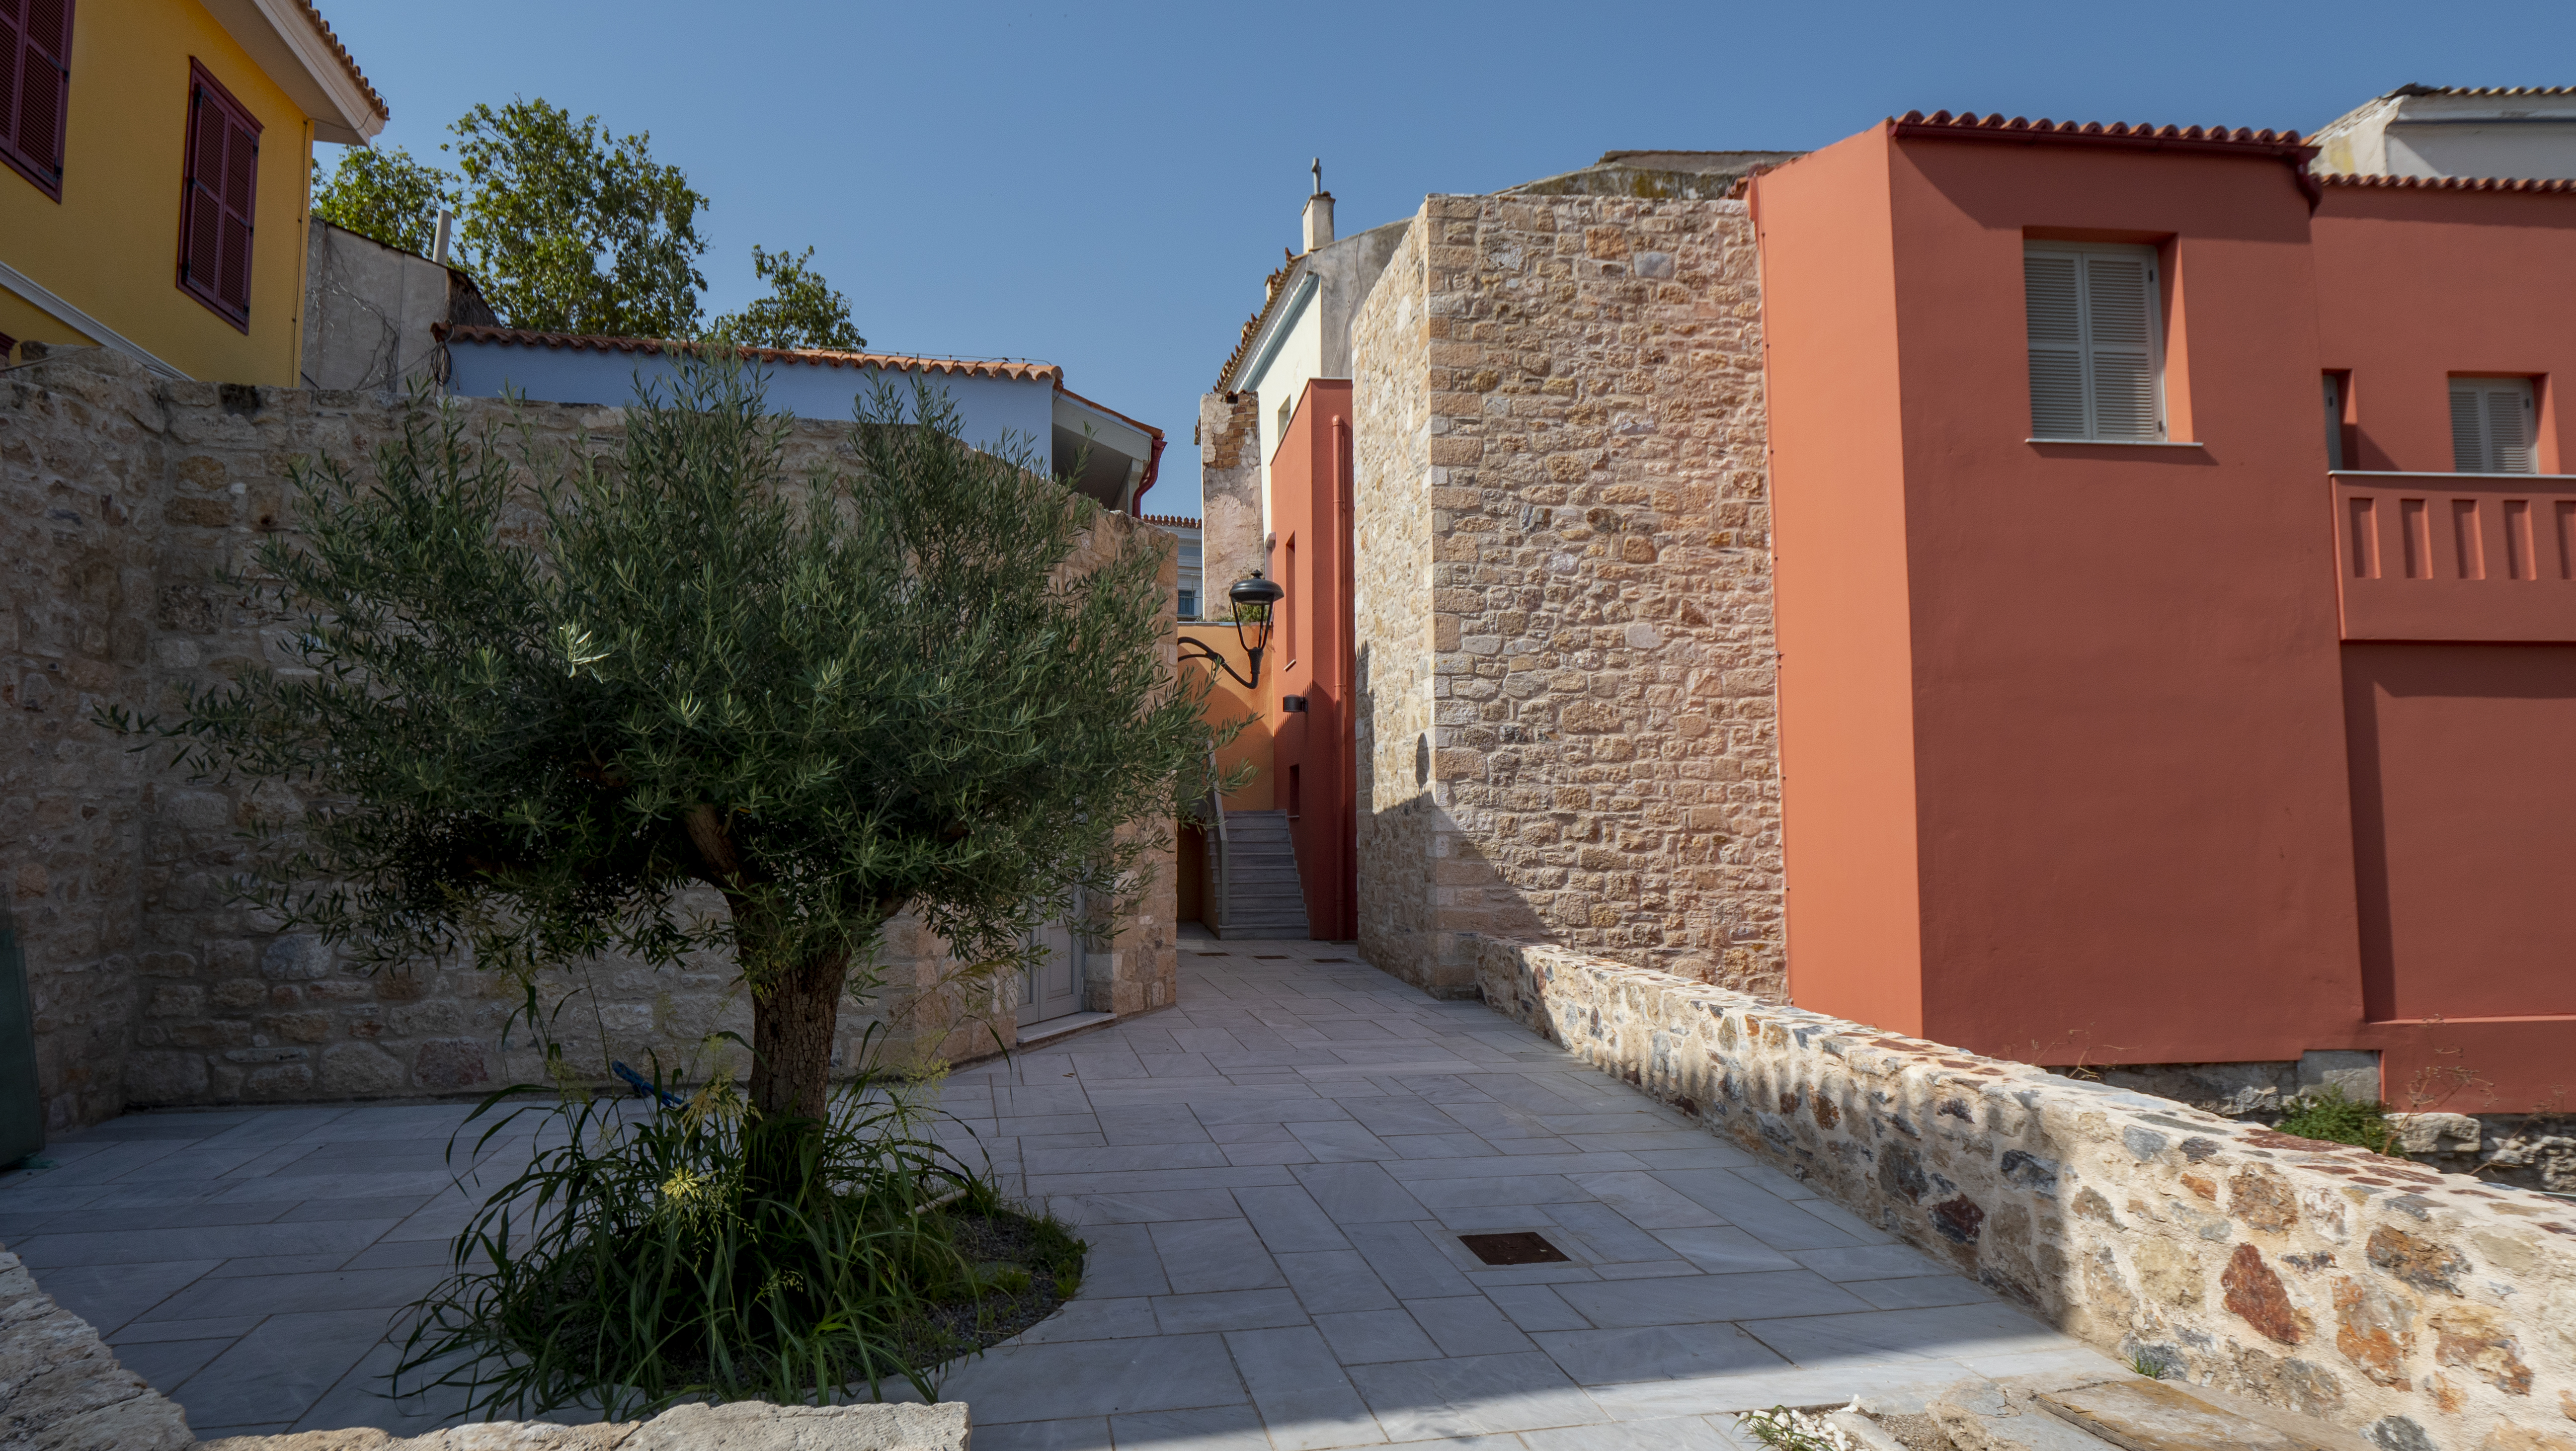 Interior courtyard at the new premises of the Museum of Modern Greek Culture ©Museum of Modern Greek Culture – Hellenic Ministry of Culture and Sports